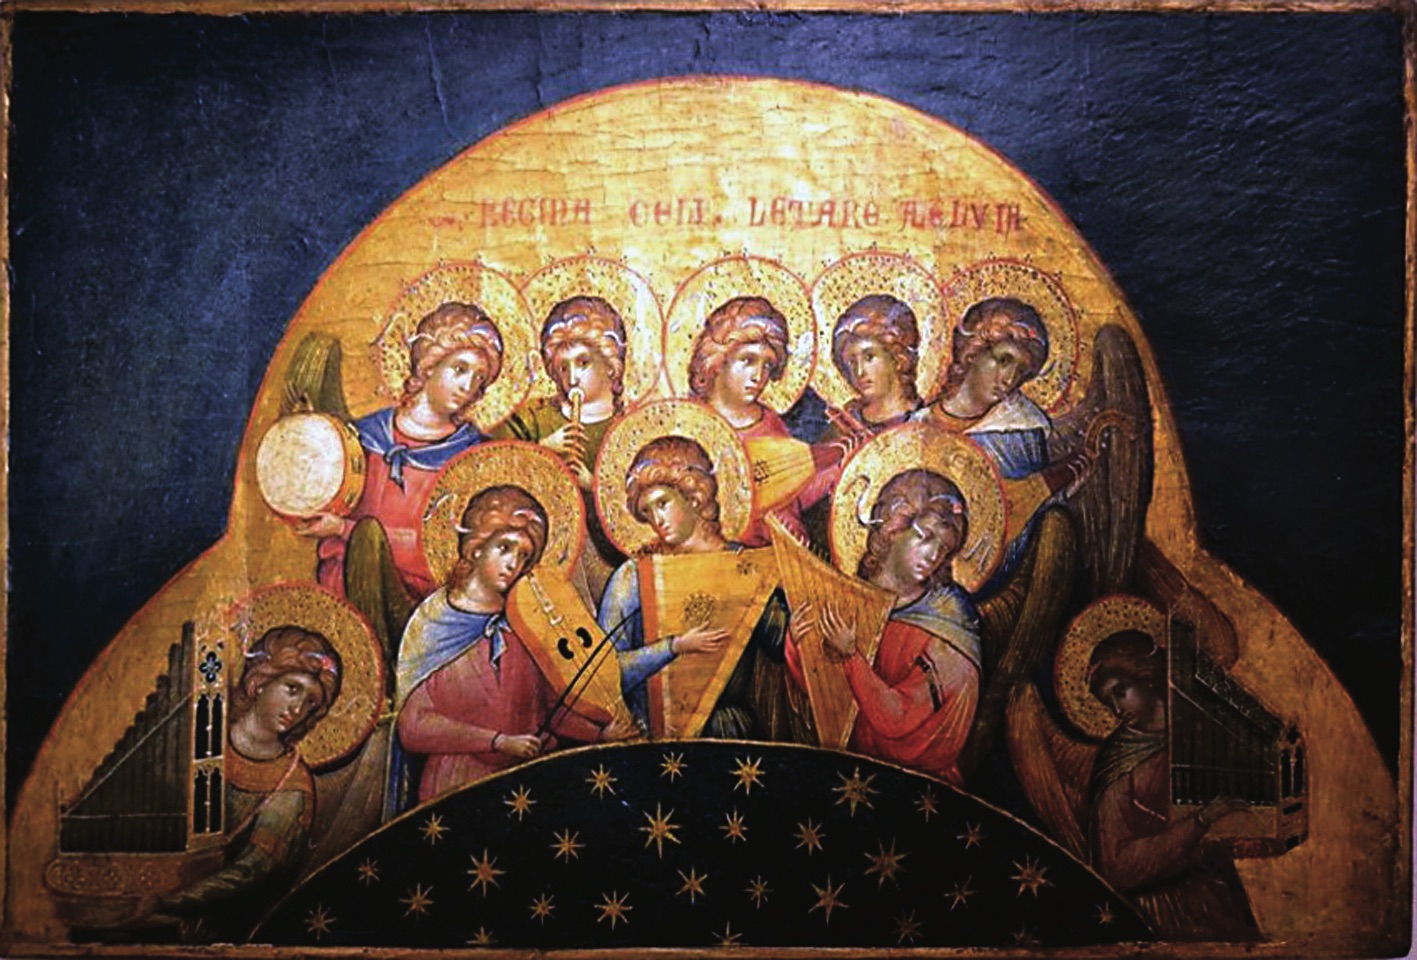 Marking All Saints’ Day in Song